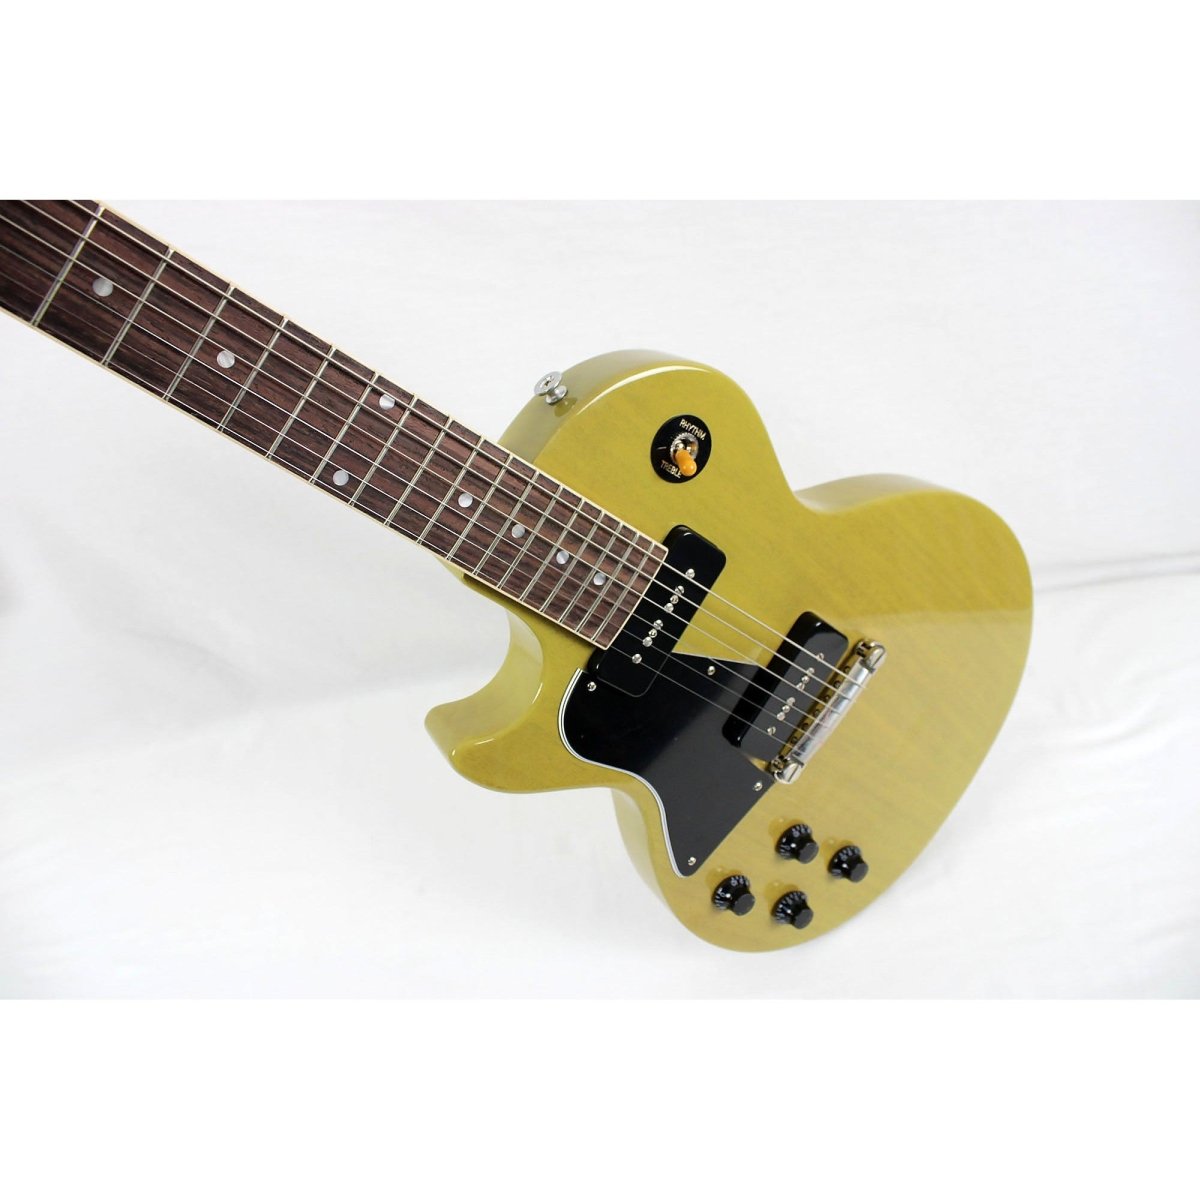 Gibson Les Paul Special Left-handed - TV Yellow **USED - MINT 